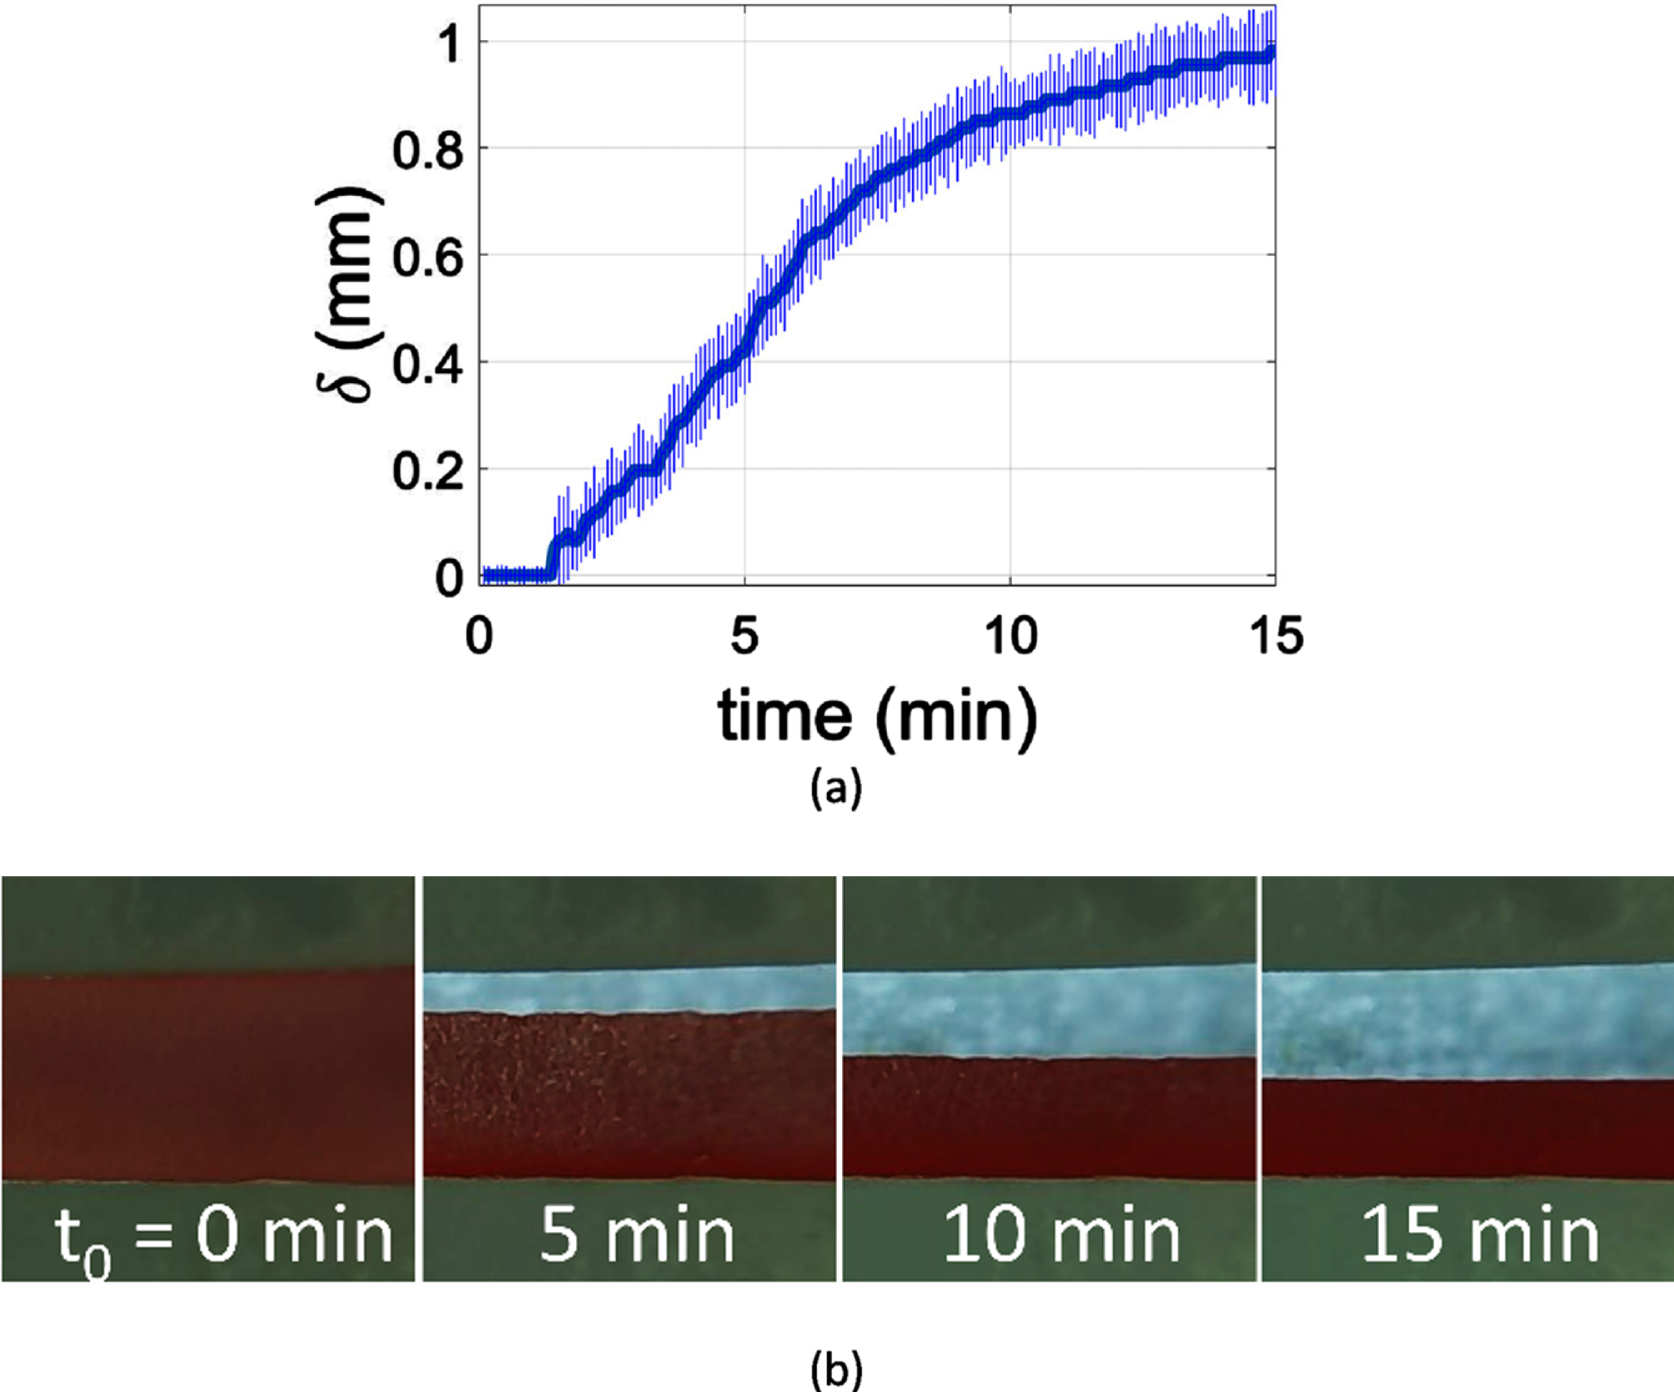 (a) Measurement of the average blood layer width along the channel in the period of 15 minutes; the error bars correspond to the standard deviation of the measurement. (b) Erythrocyte sedimentation as captured in the channel at 5 min, 10 min and 15 min for a 30% haematocrit blood sample.